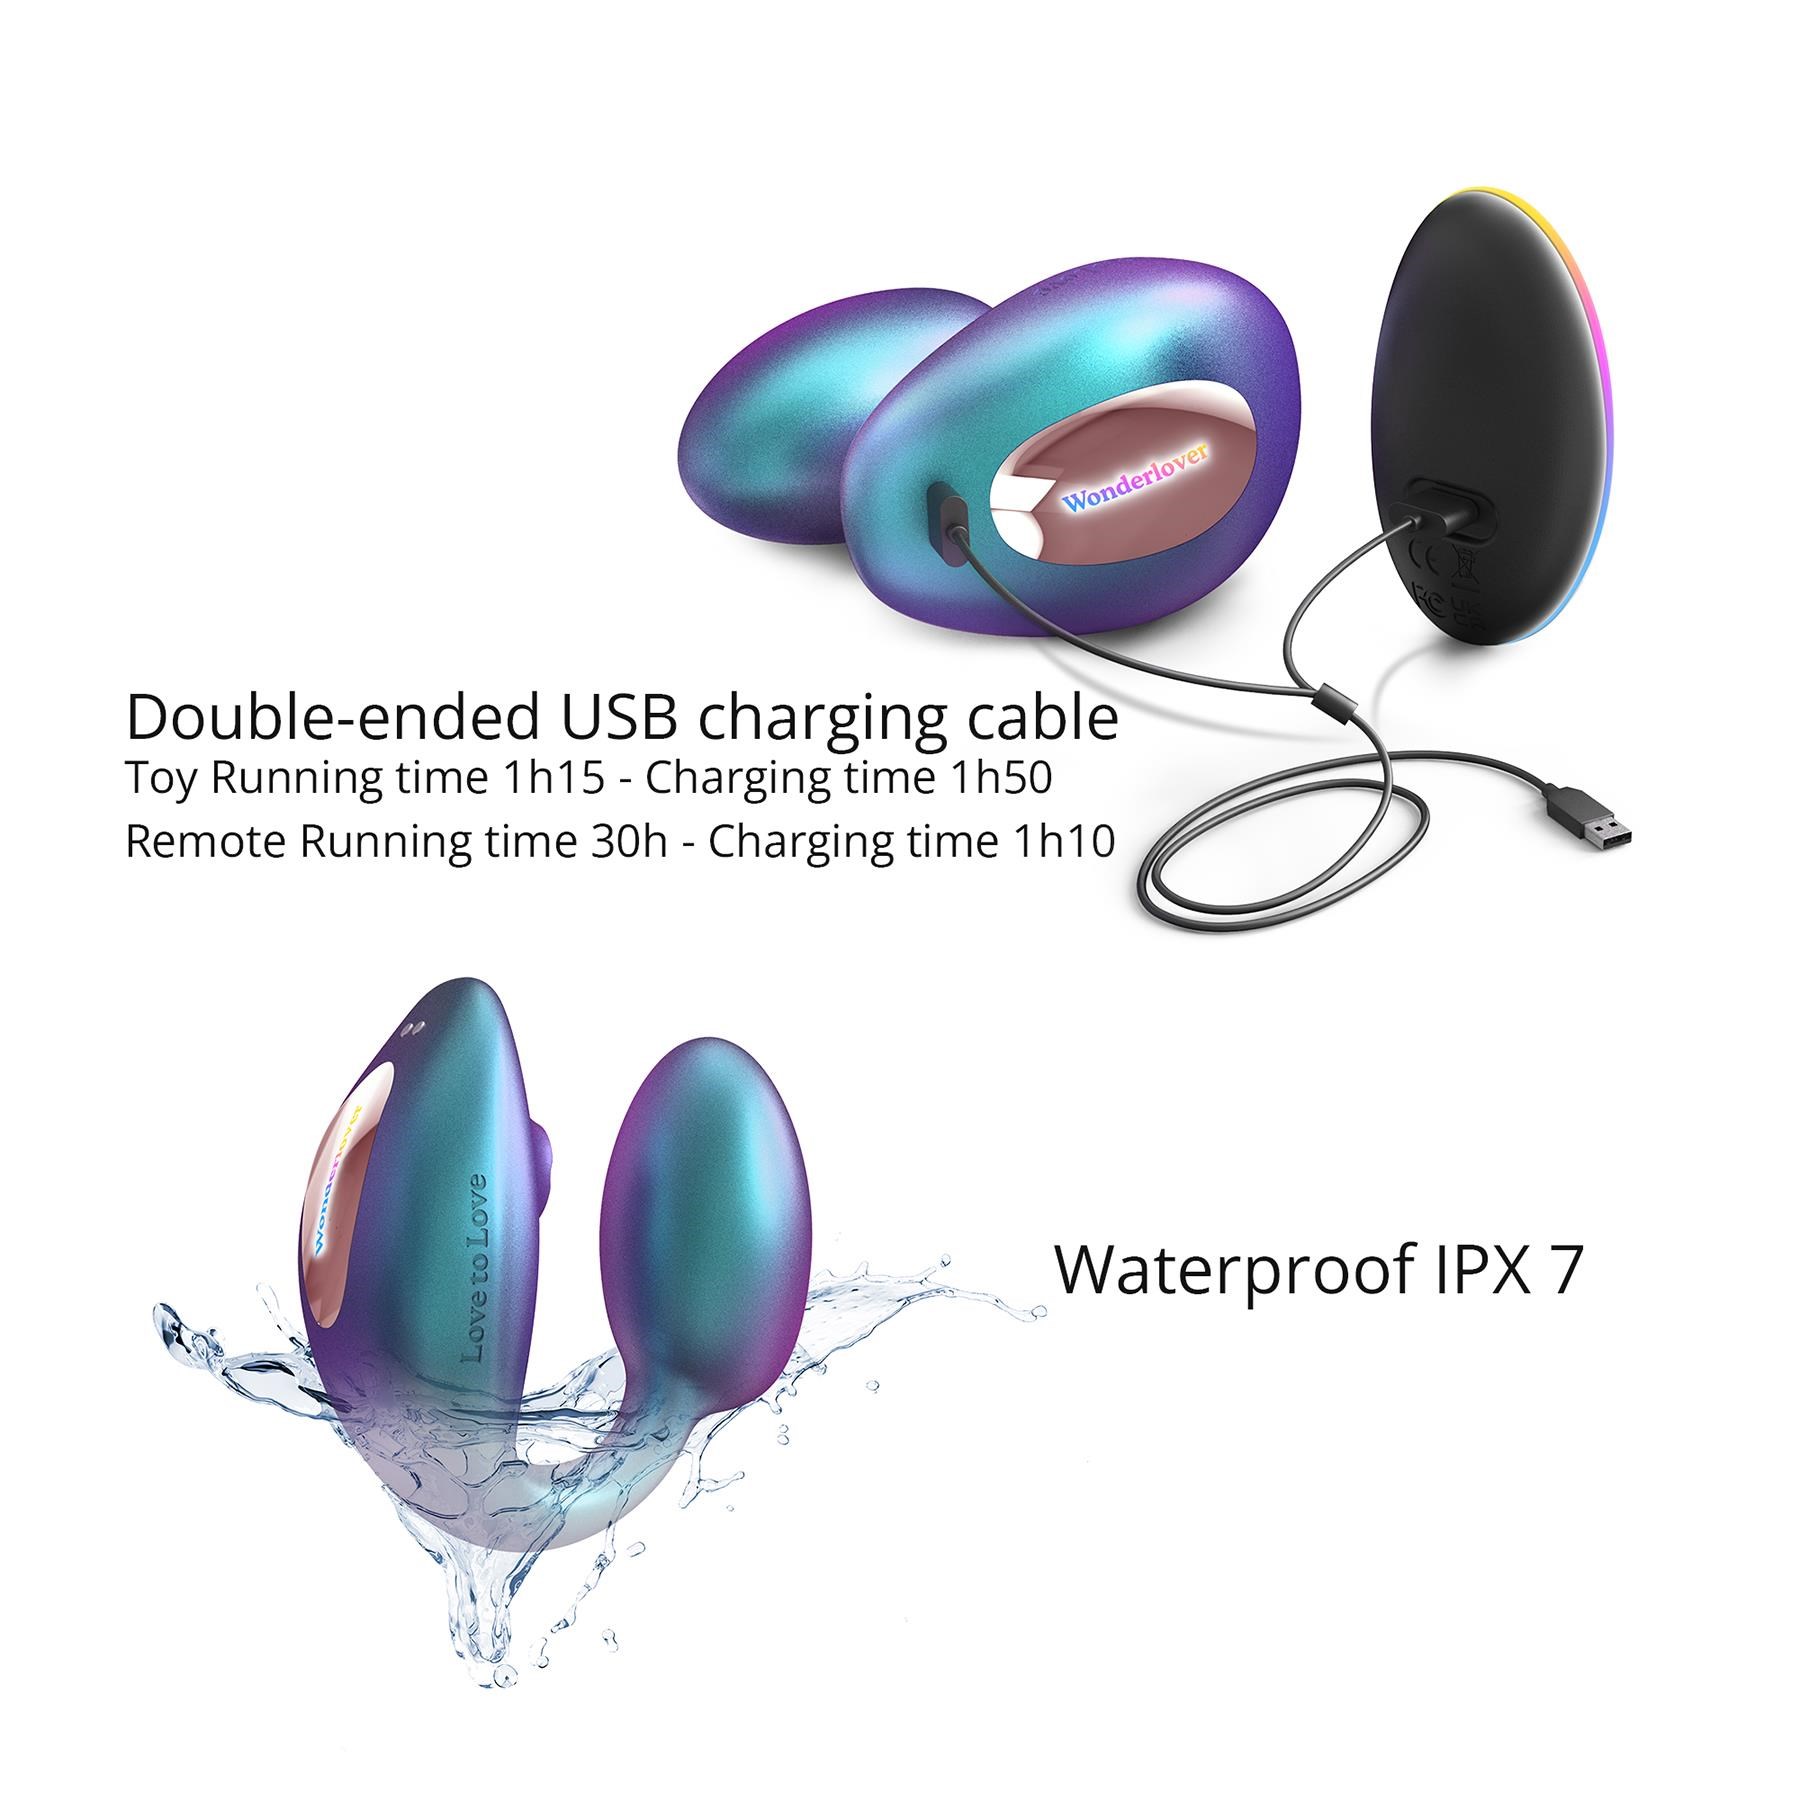 Wonderlover Dual Motor Clitoral & G-Spot Massager-Showing Where Charging Cable is Placed/Waterproof